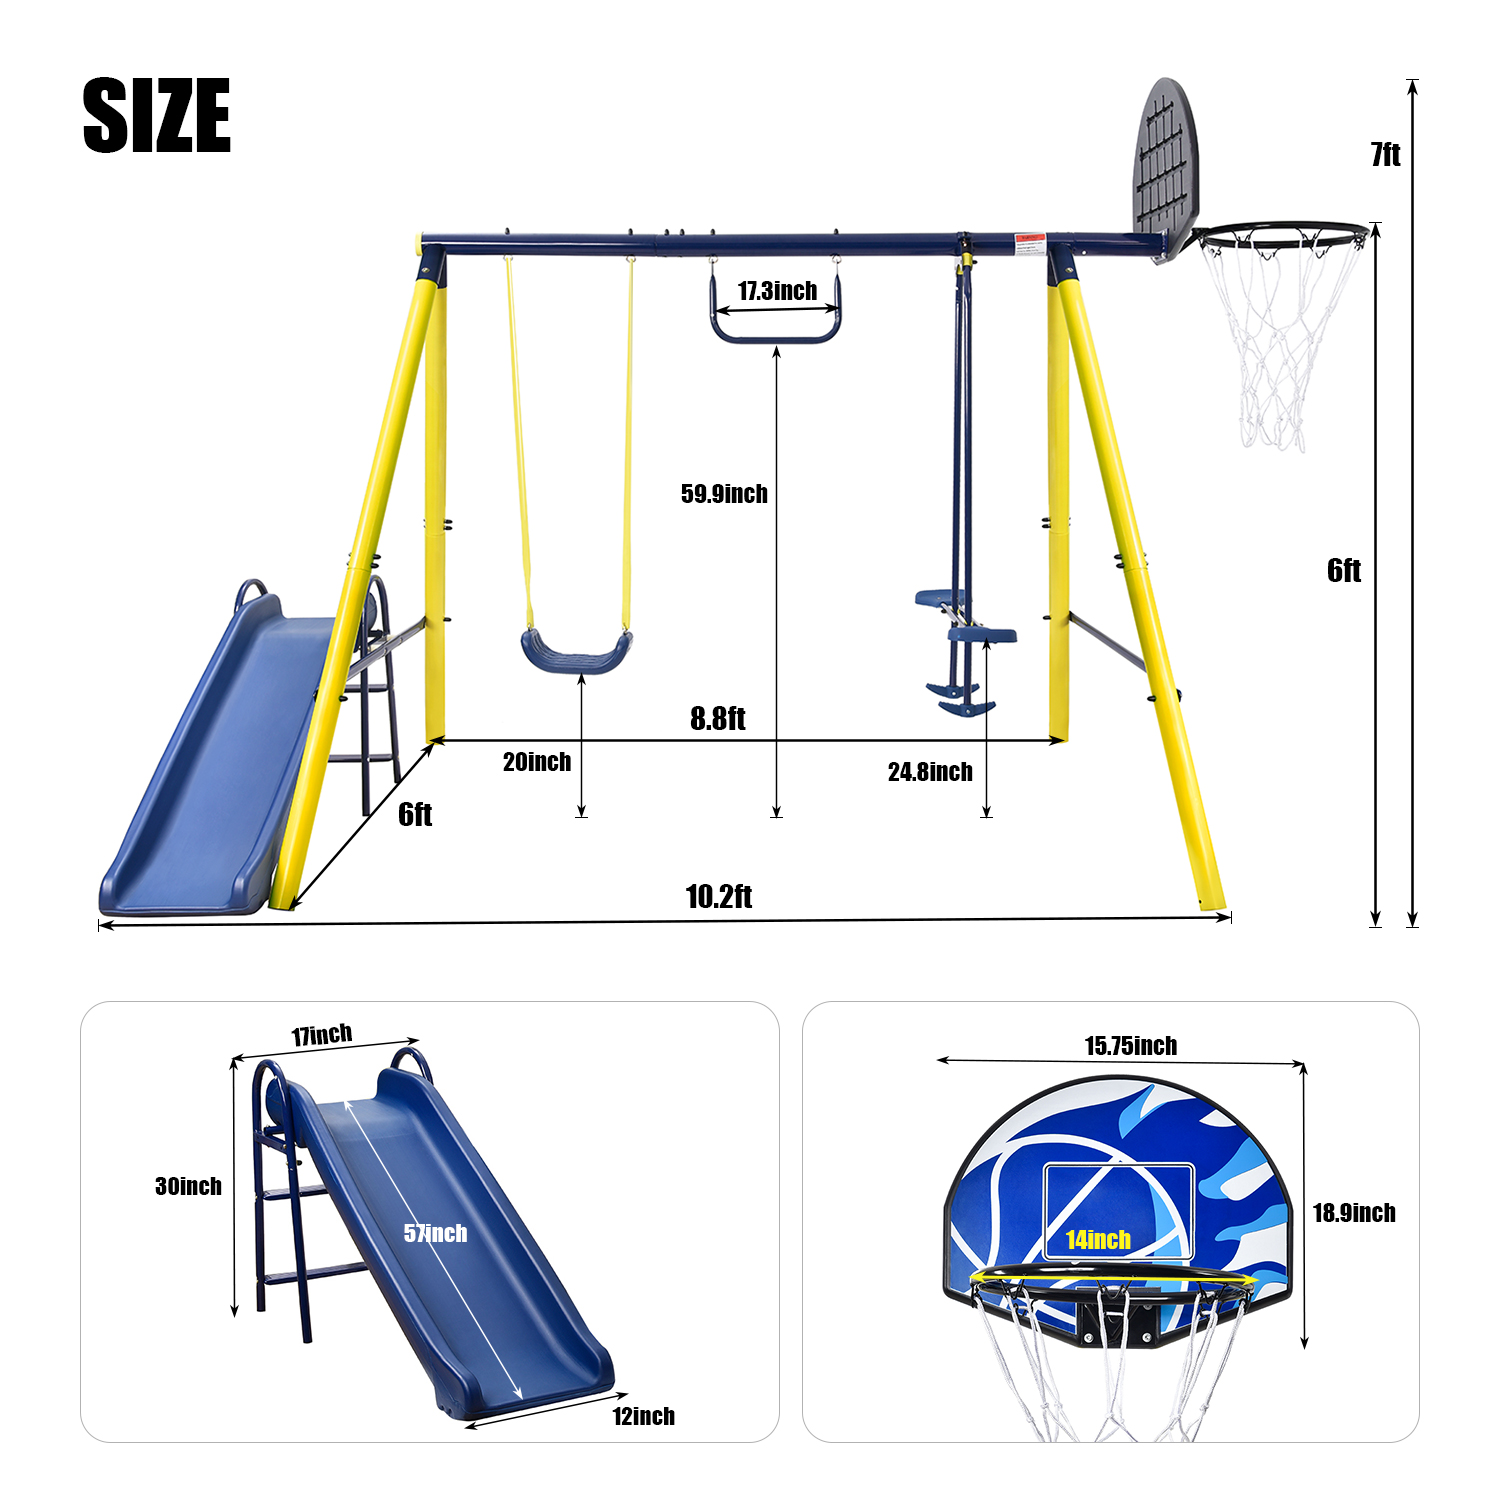 5 In 1 Outdoor Tolddler Swing Set With Silde Playset For Backyard Playground (14)